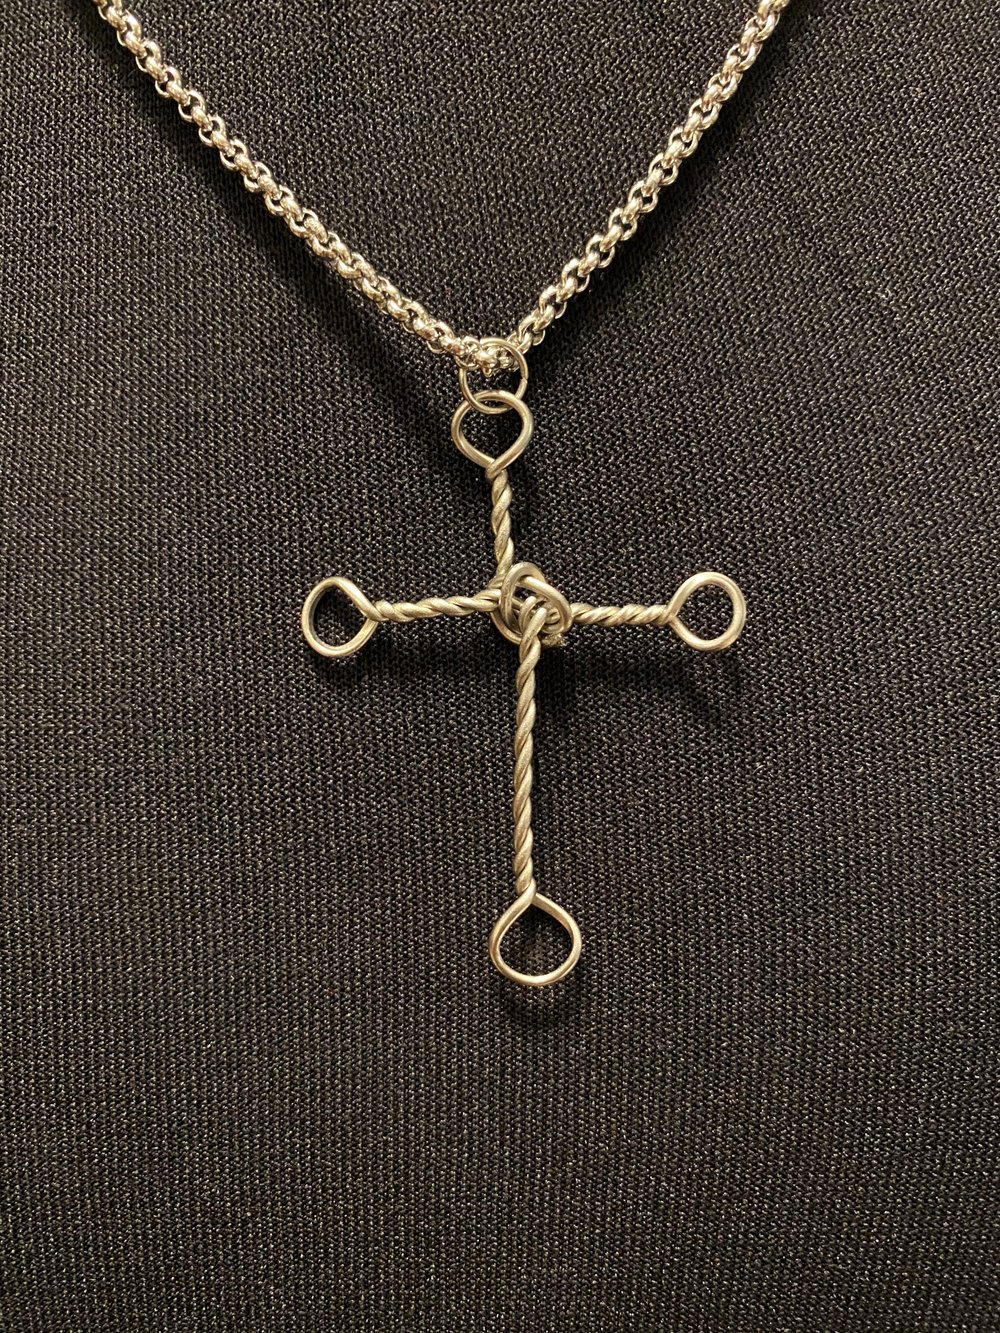 Stainless Steel Cross and Chain Necklace